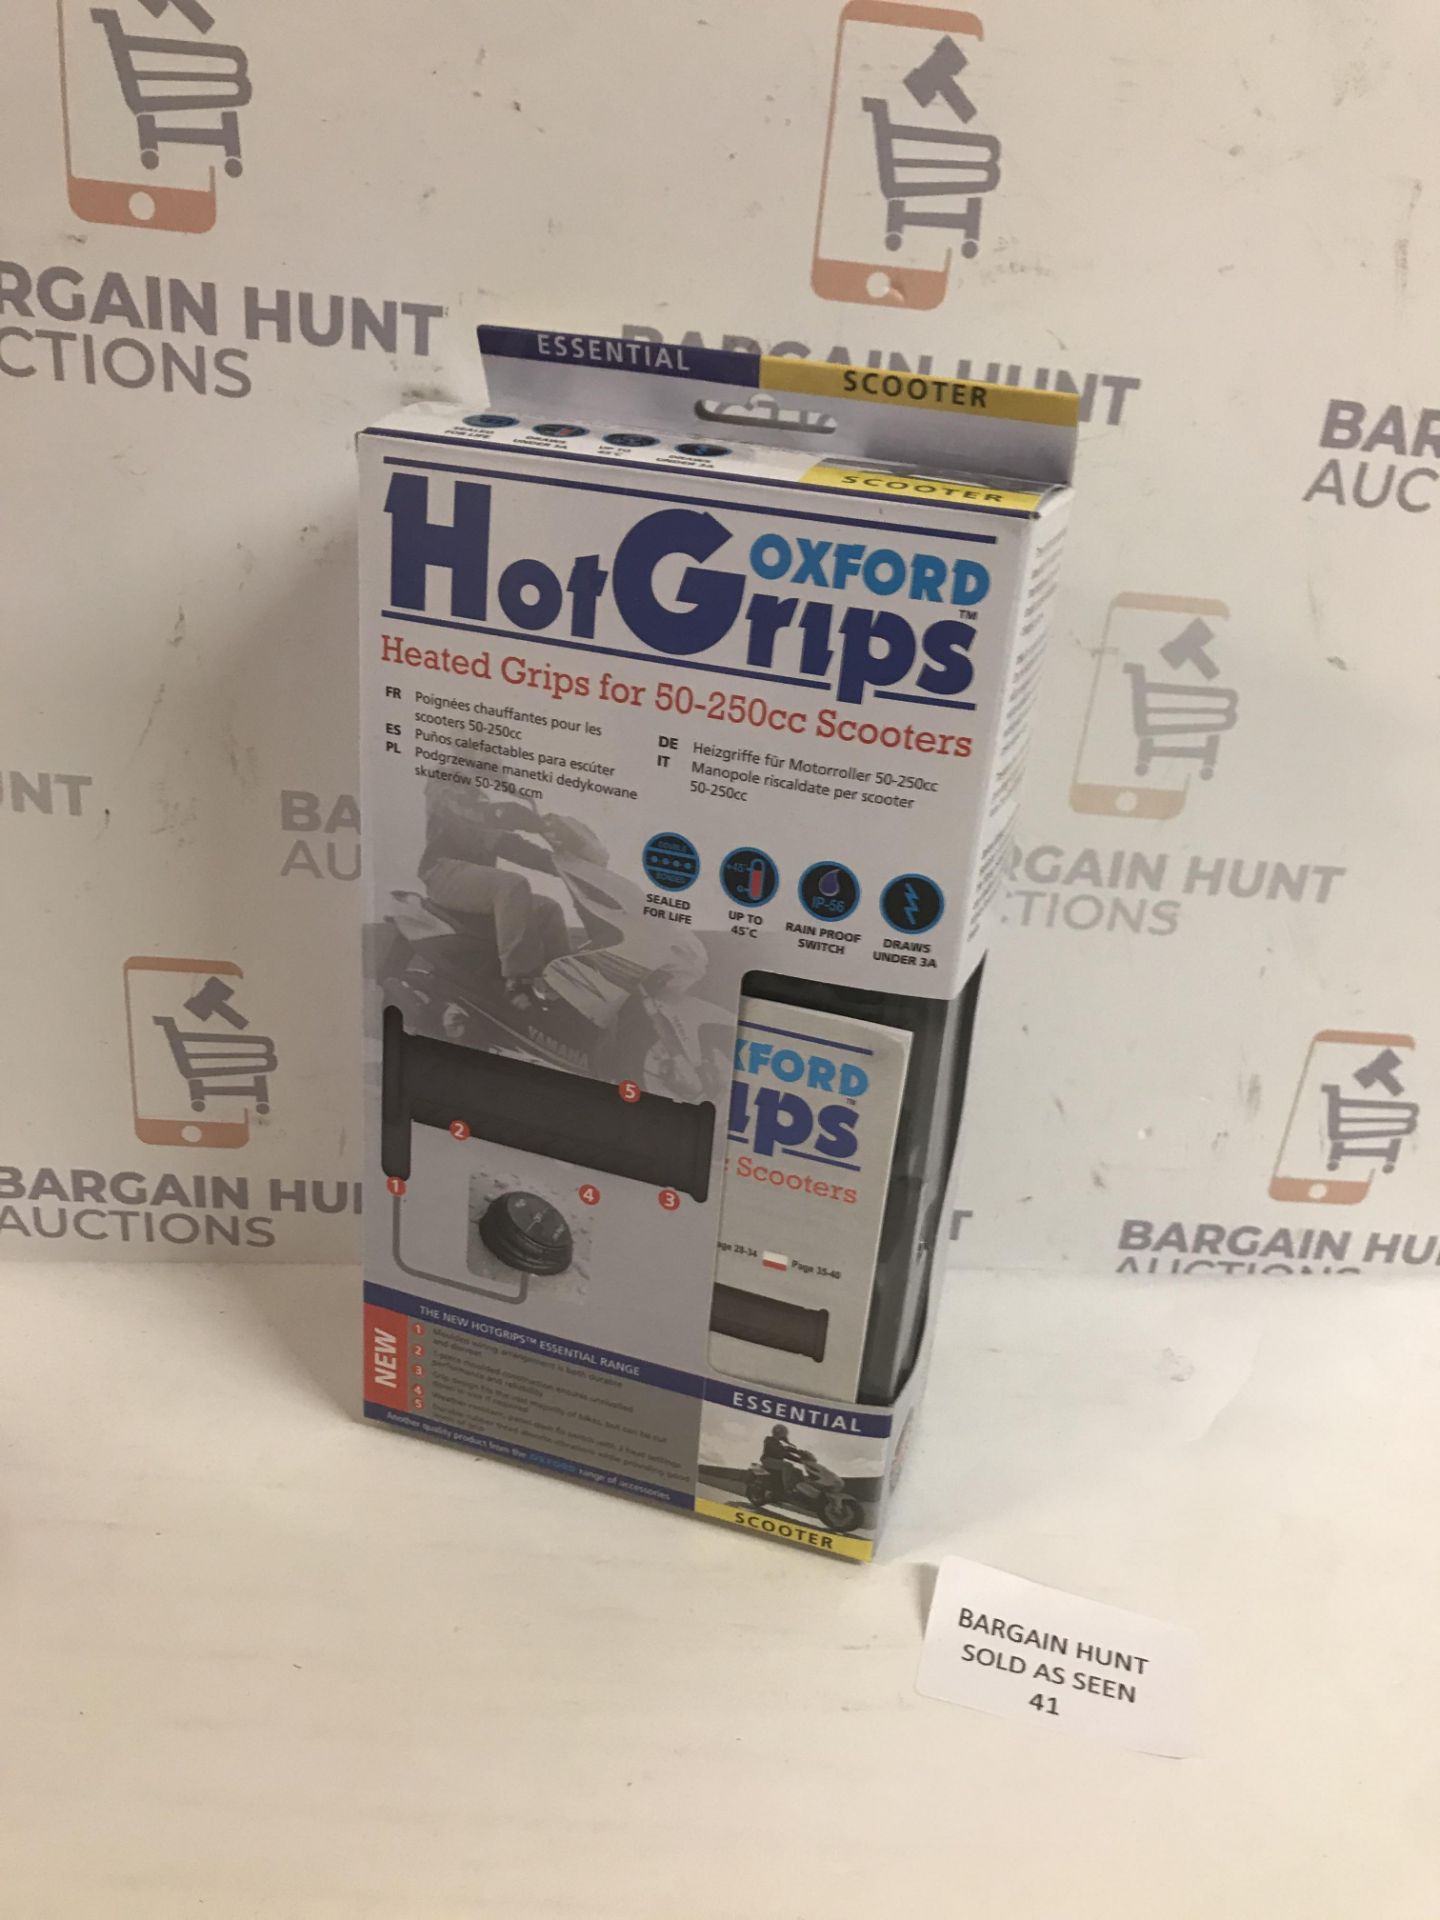 Oxford Hot Grips Heated Grips for 50-250cc Scooters